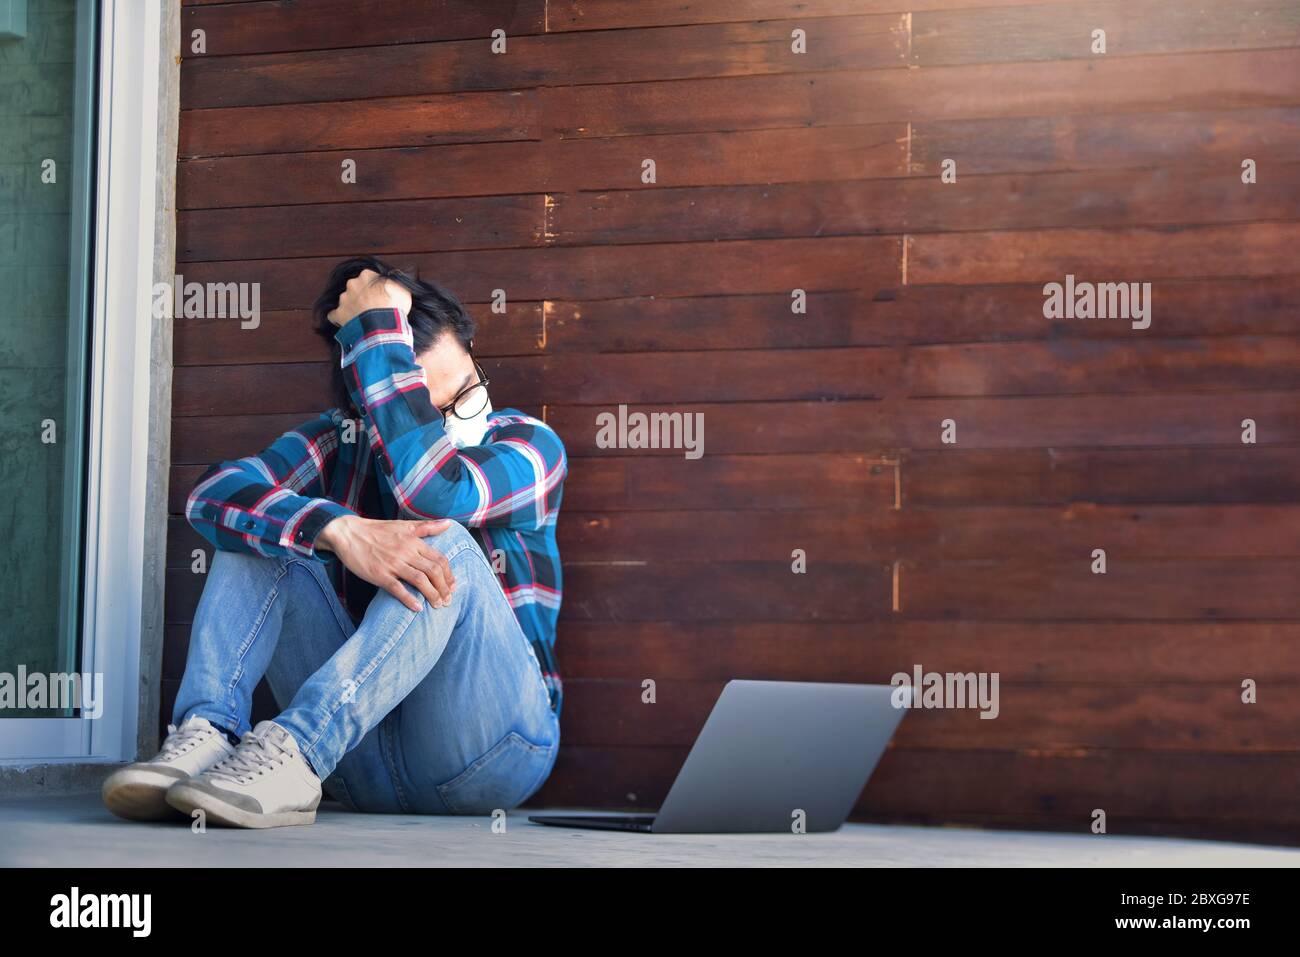 Distressed man sitting on ground with his laptop during lockdown Stock Photo